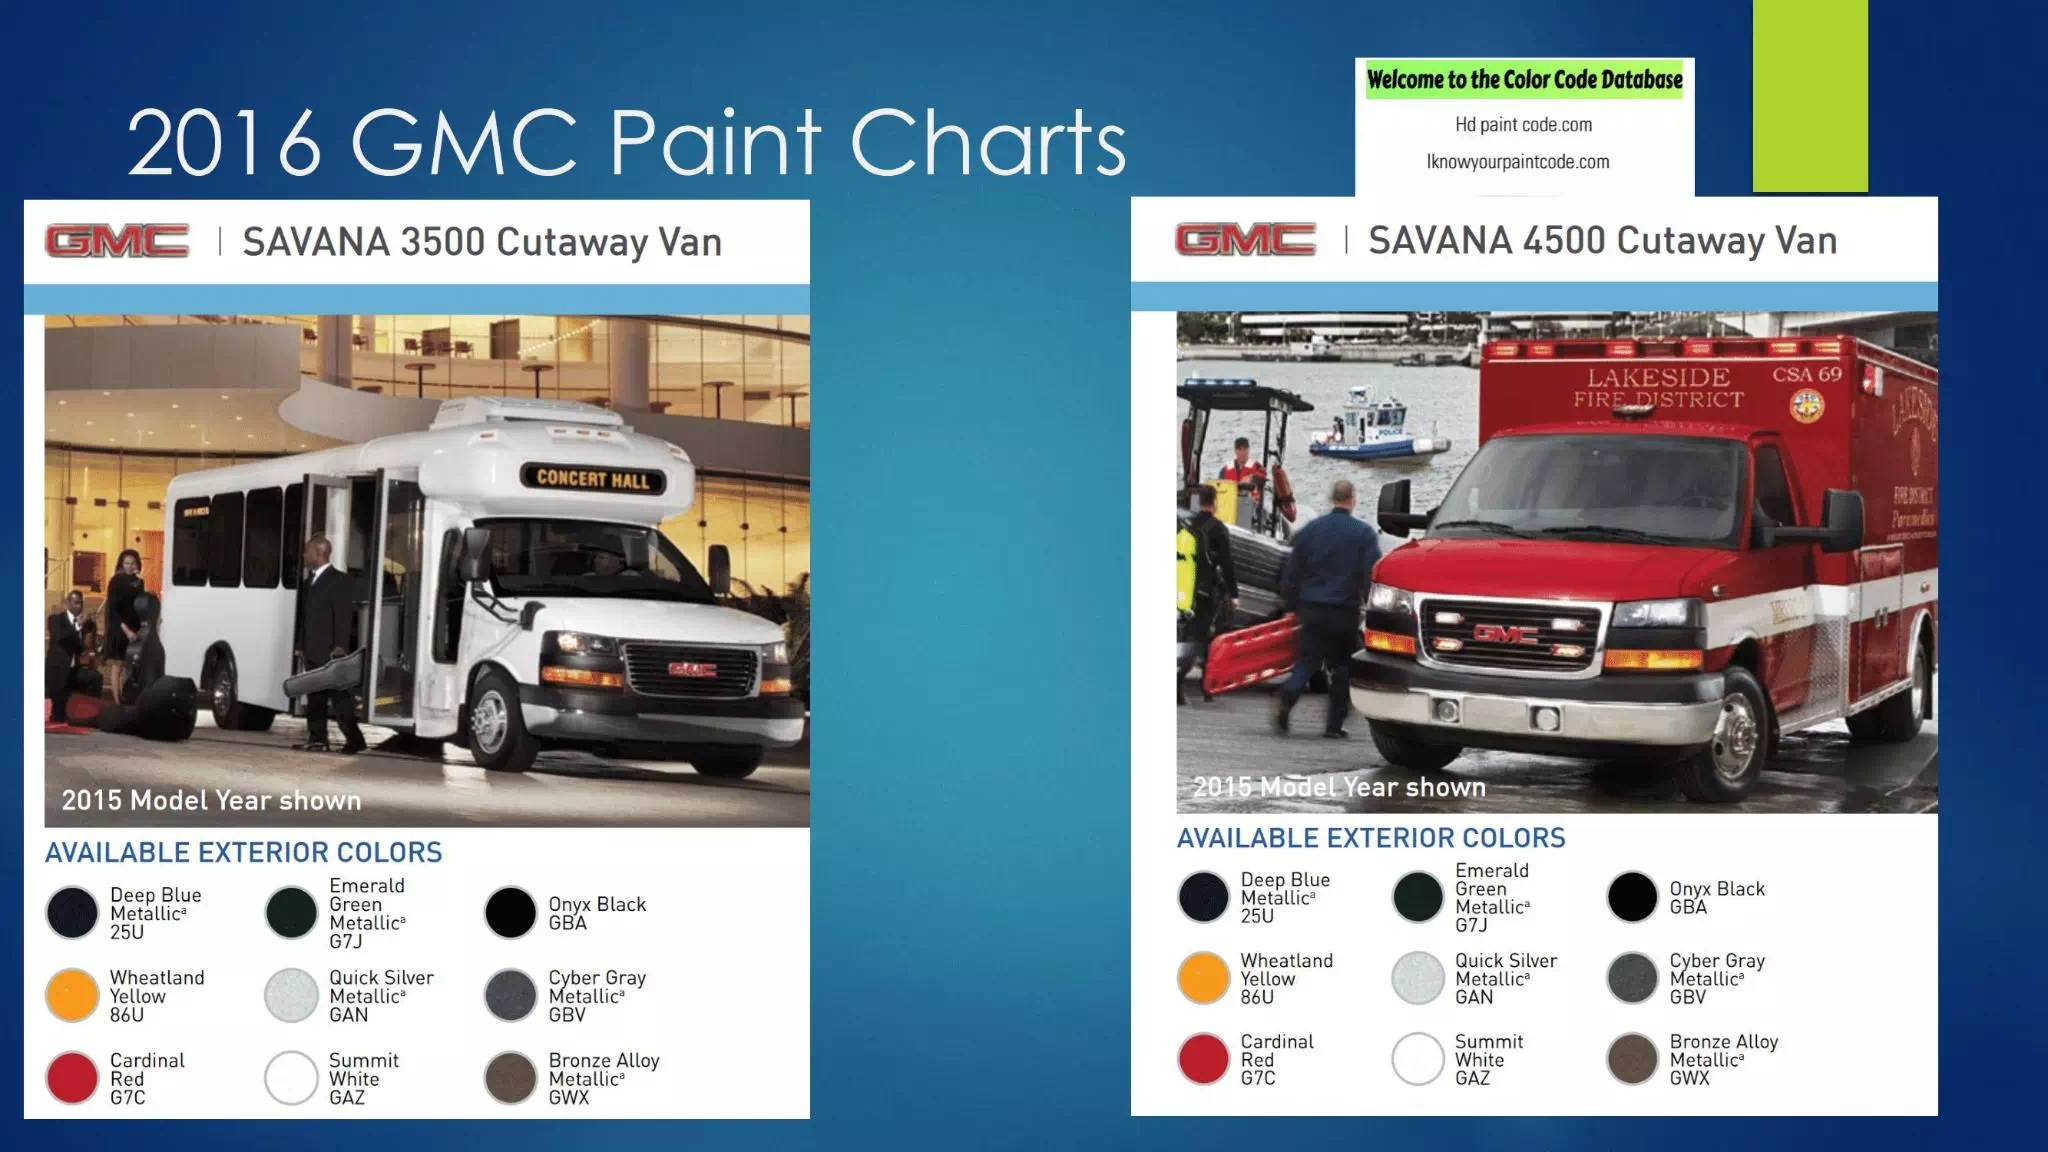 Exterior Colors used on GM Fleet Vehicles